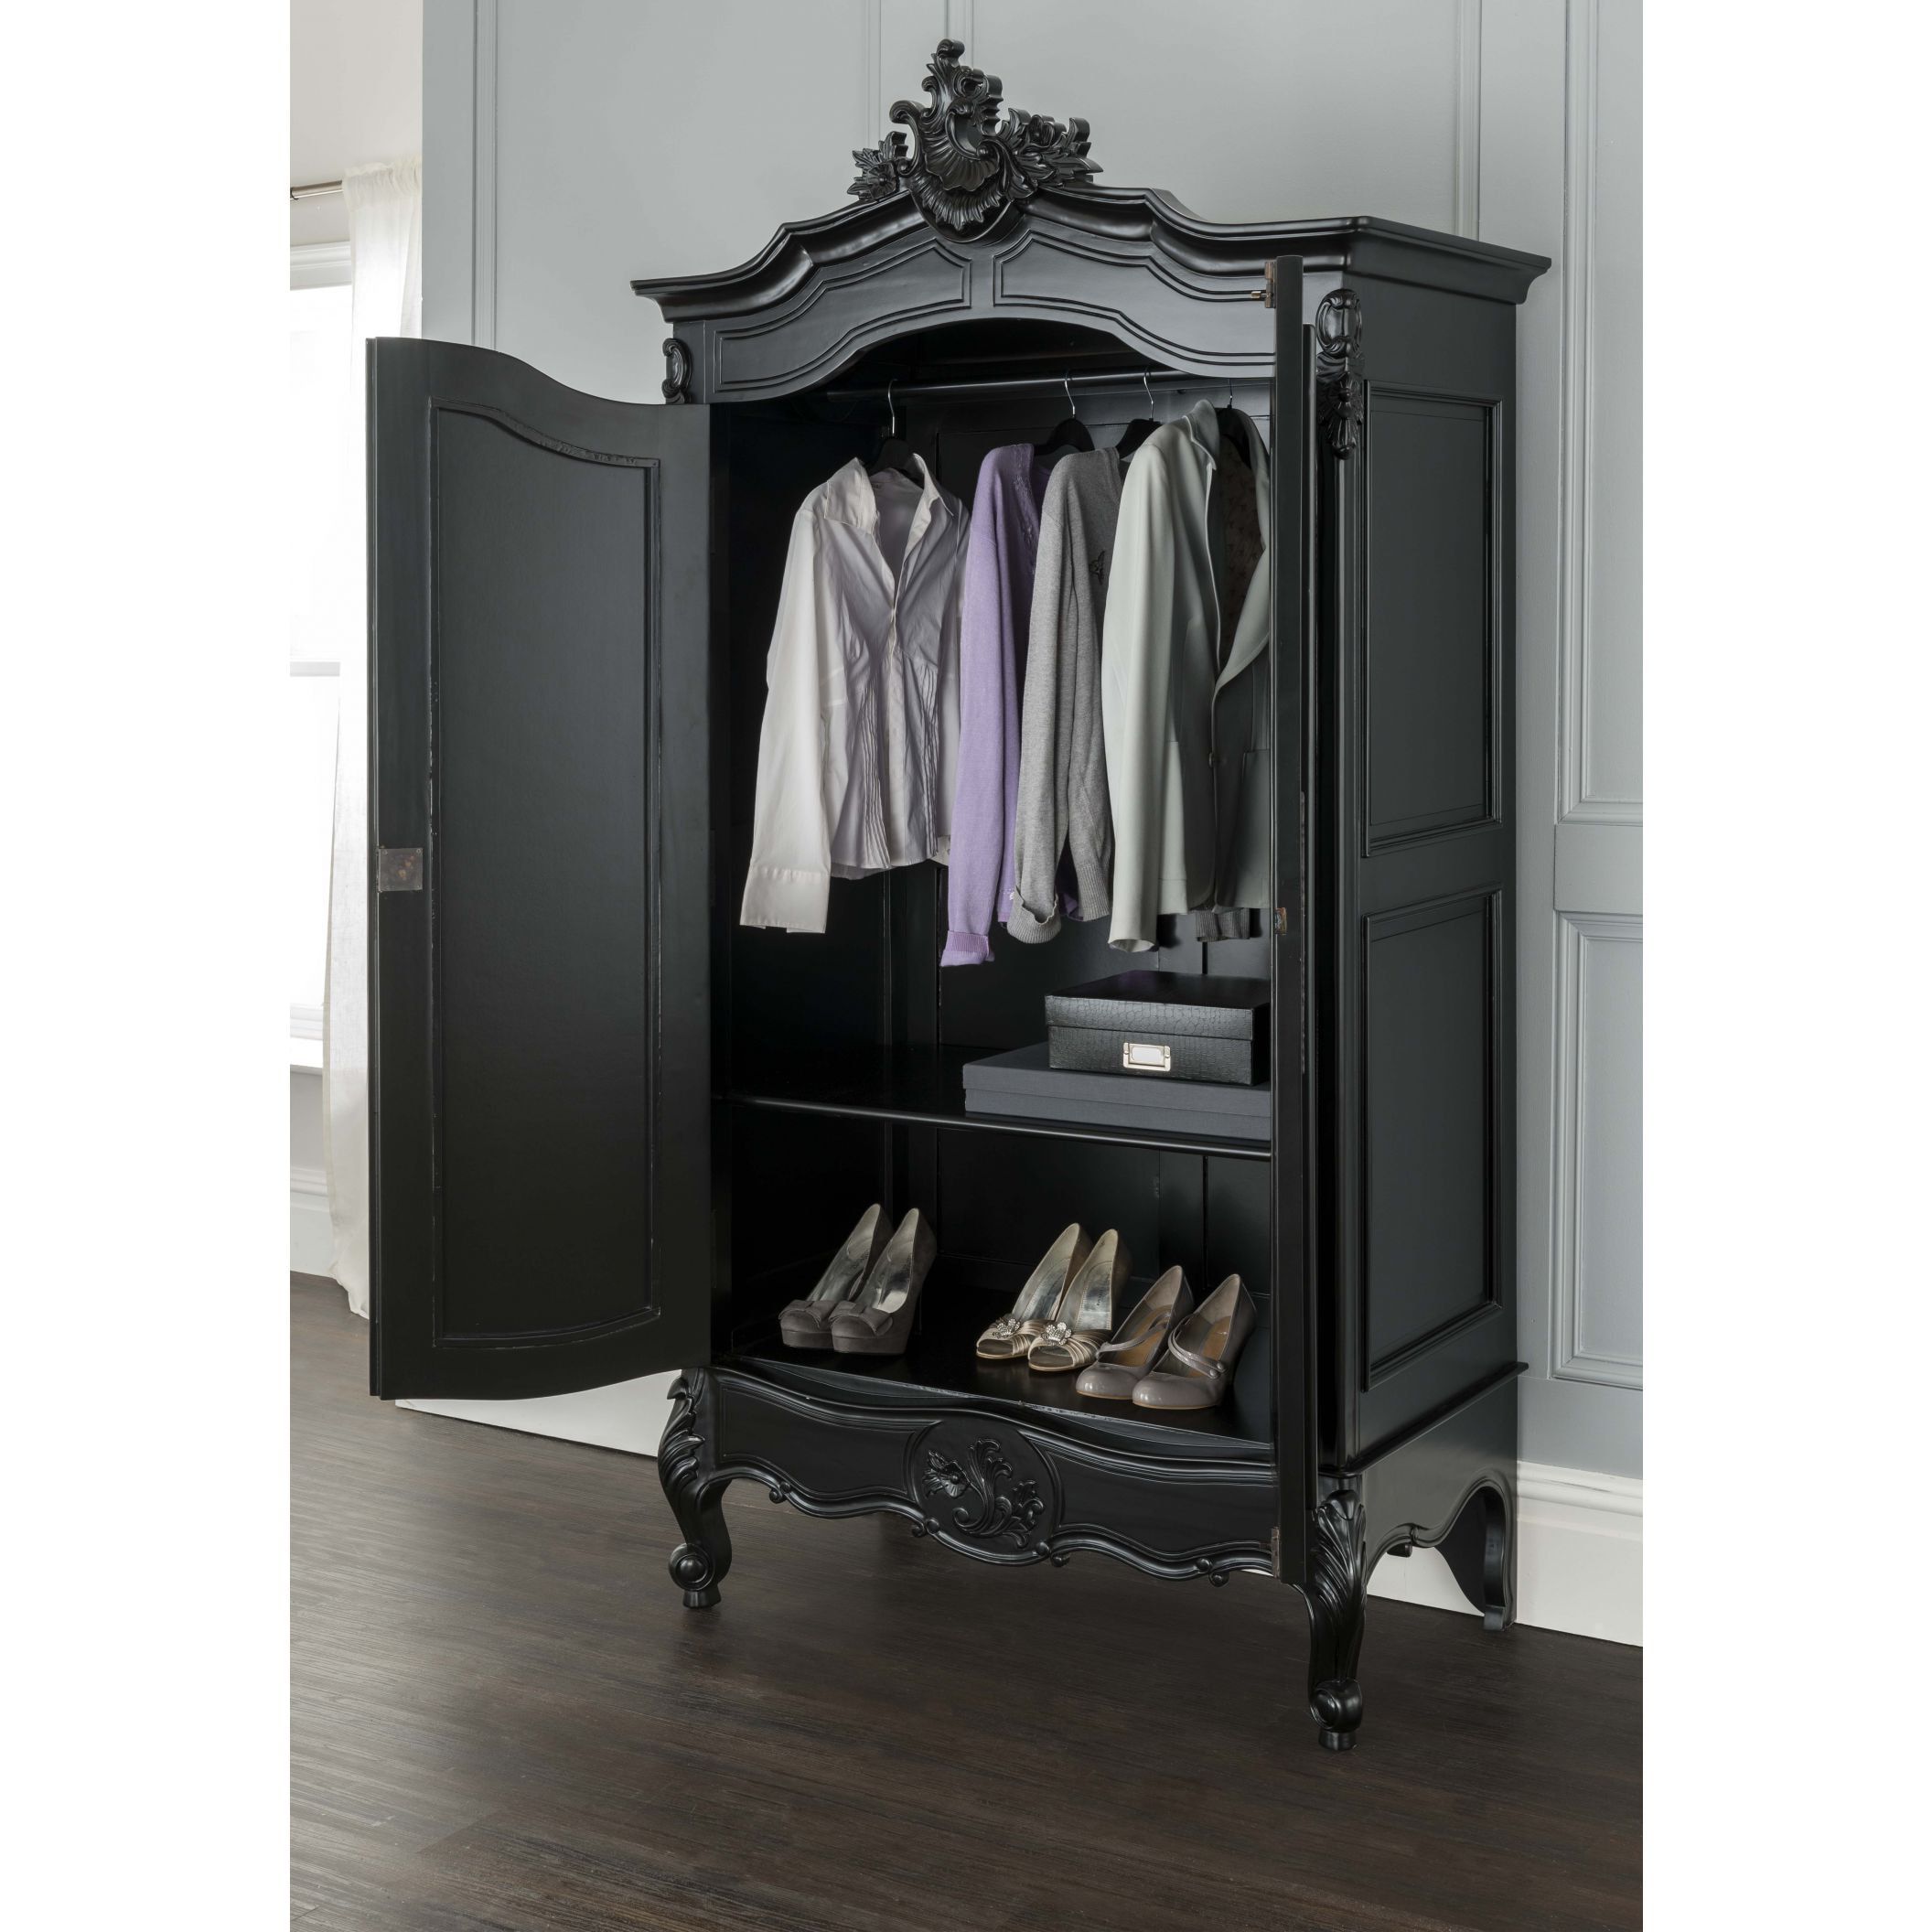 La Rochelle Antique French Wardrobe | Black Furniture Collection Pertaining To Black French Style Wardrobes (View 11 of 20)